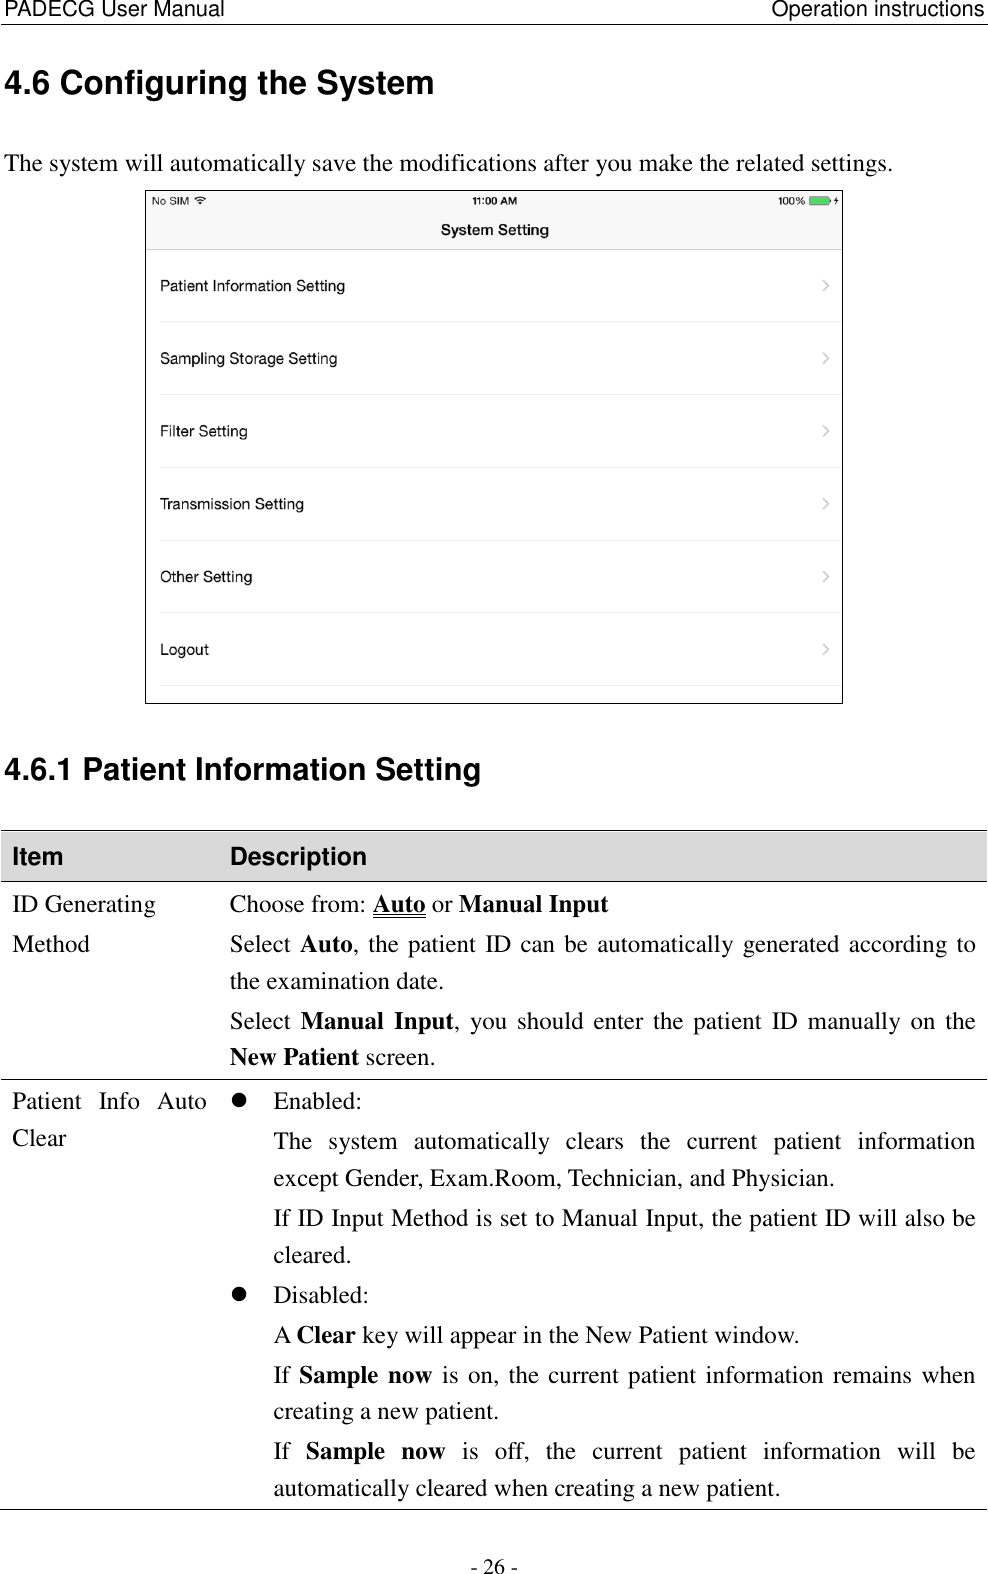 PADECG User Manual                                                  Operation instructions - 26 - 4.6 Configuring the System The system will automatically save the modifications after you make the related settings.    4.6.1 Patient Information Setting Item Description ID Generating Method Choose from: Auto or Manual Input Select Auto, the patient ID can be automatically generated according to the examination date. Select Manual Input,  you should enter the patient  ID manually on the New Patient screen. Patient  Info  Auto Clear  Enabled: The  system  automatically  clears  the  current  patient  information except Gender, Exam.Room, Technician, and Physician. If ID Input Method is set to Manual Input, the patient ID will also be cleared.  Disabled: A Clear key will appear in the New Patient window. If Sample now is on, the current patient information remains when creating a new patient. If  Sample  now  is  off,  the  current  patient  information  will  be automatically cleared when creating a new patient. 